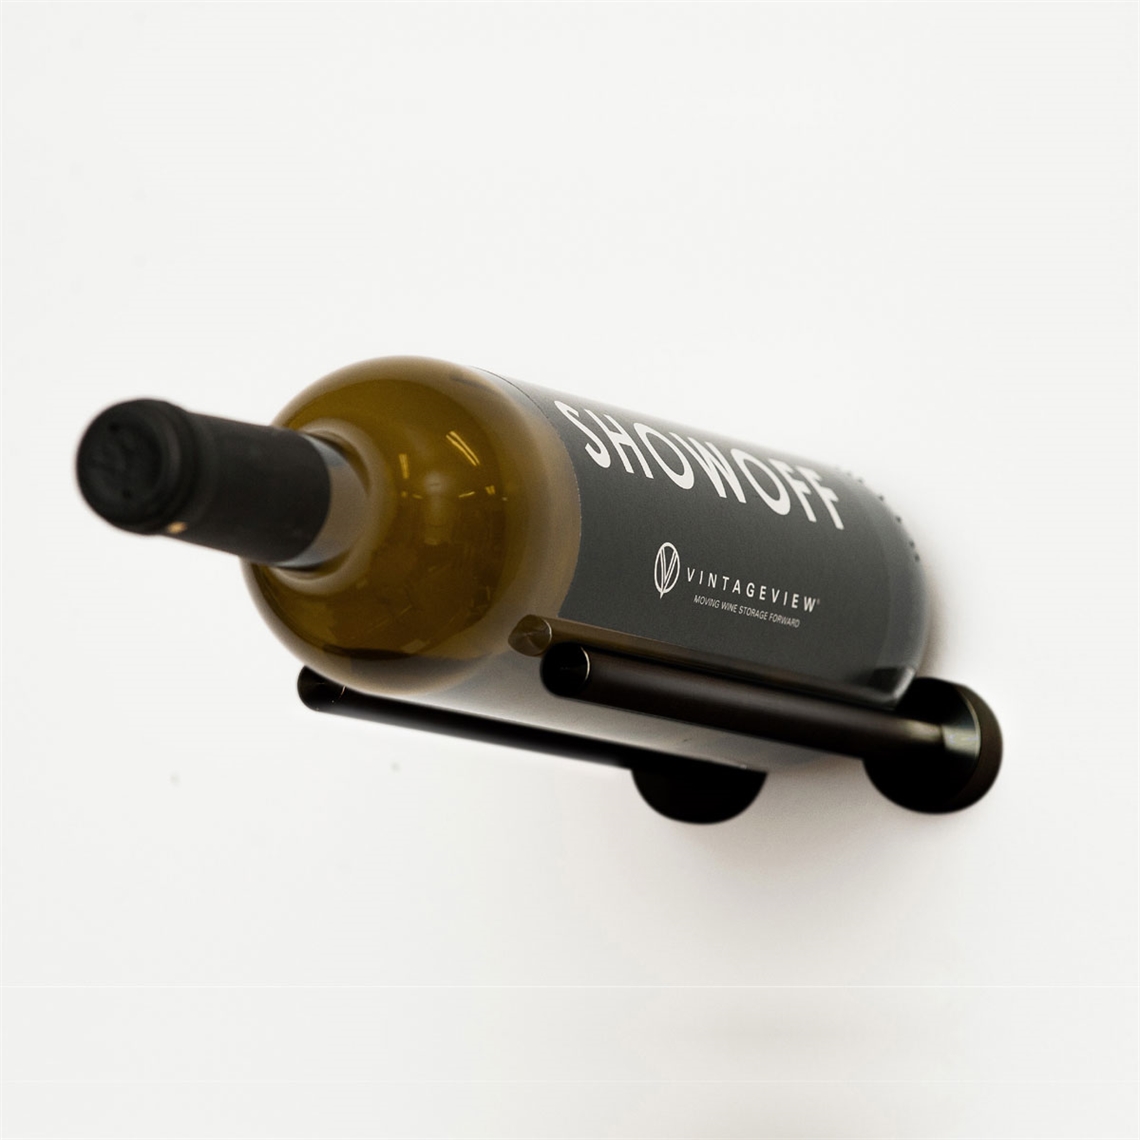 View more wine walls from our Wall Mounted Wine Racks range